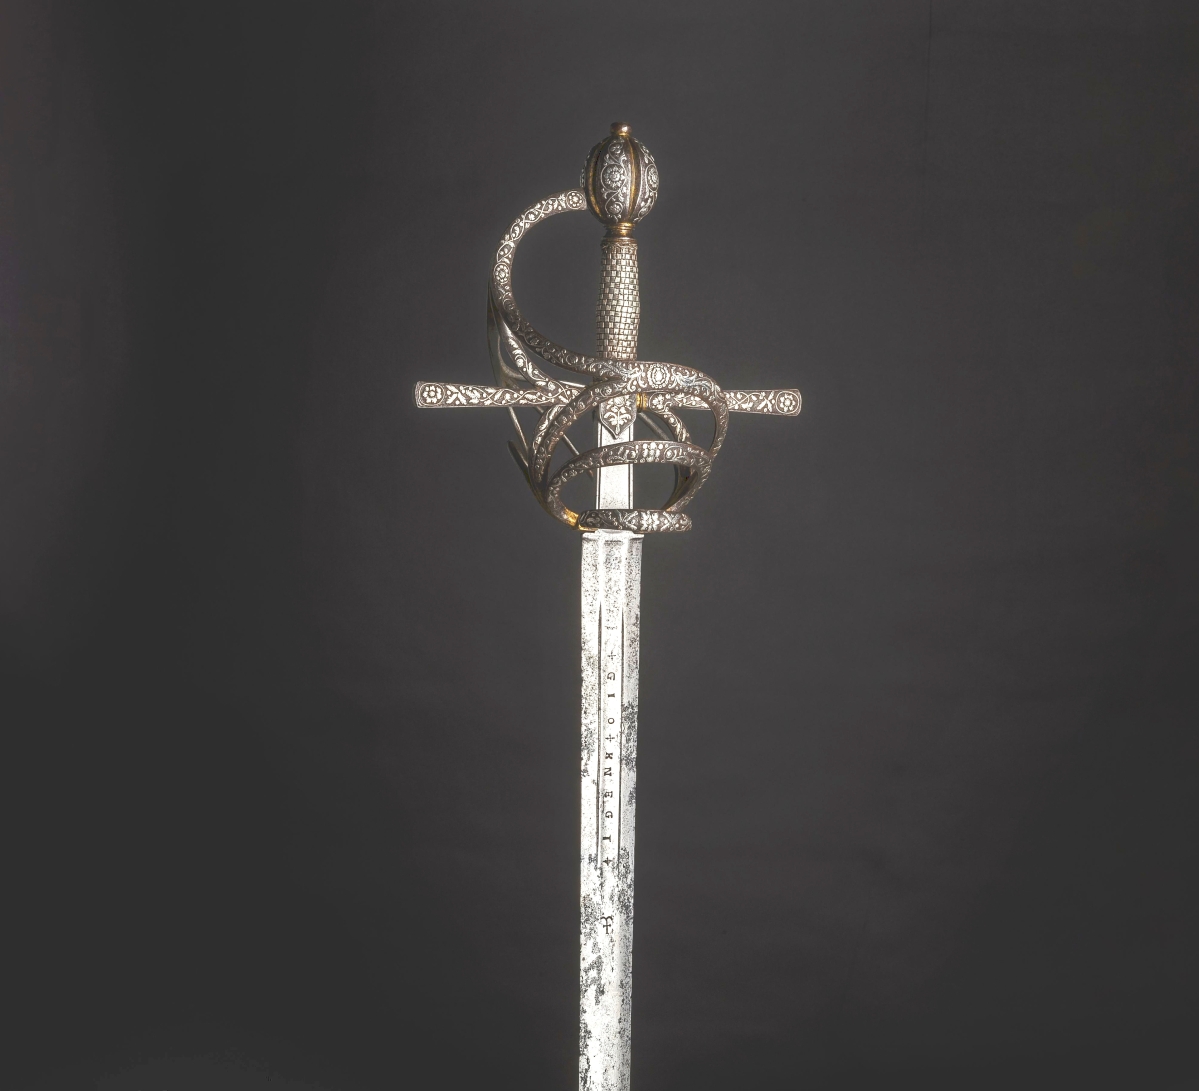 The top lot in the antique arms and armor sale on May 27 was this circa 1610 German rapier with silver-damascened and gilt guard, which is comparable to examples in the Wallace Collection and in the Dreger Collection in Berlin. It sold for $53,351.